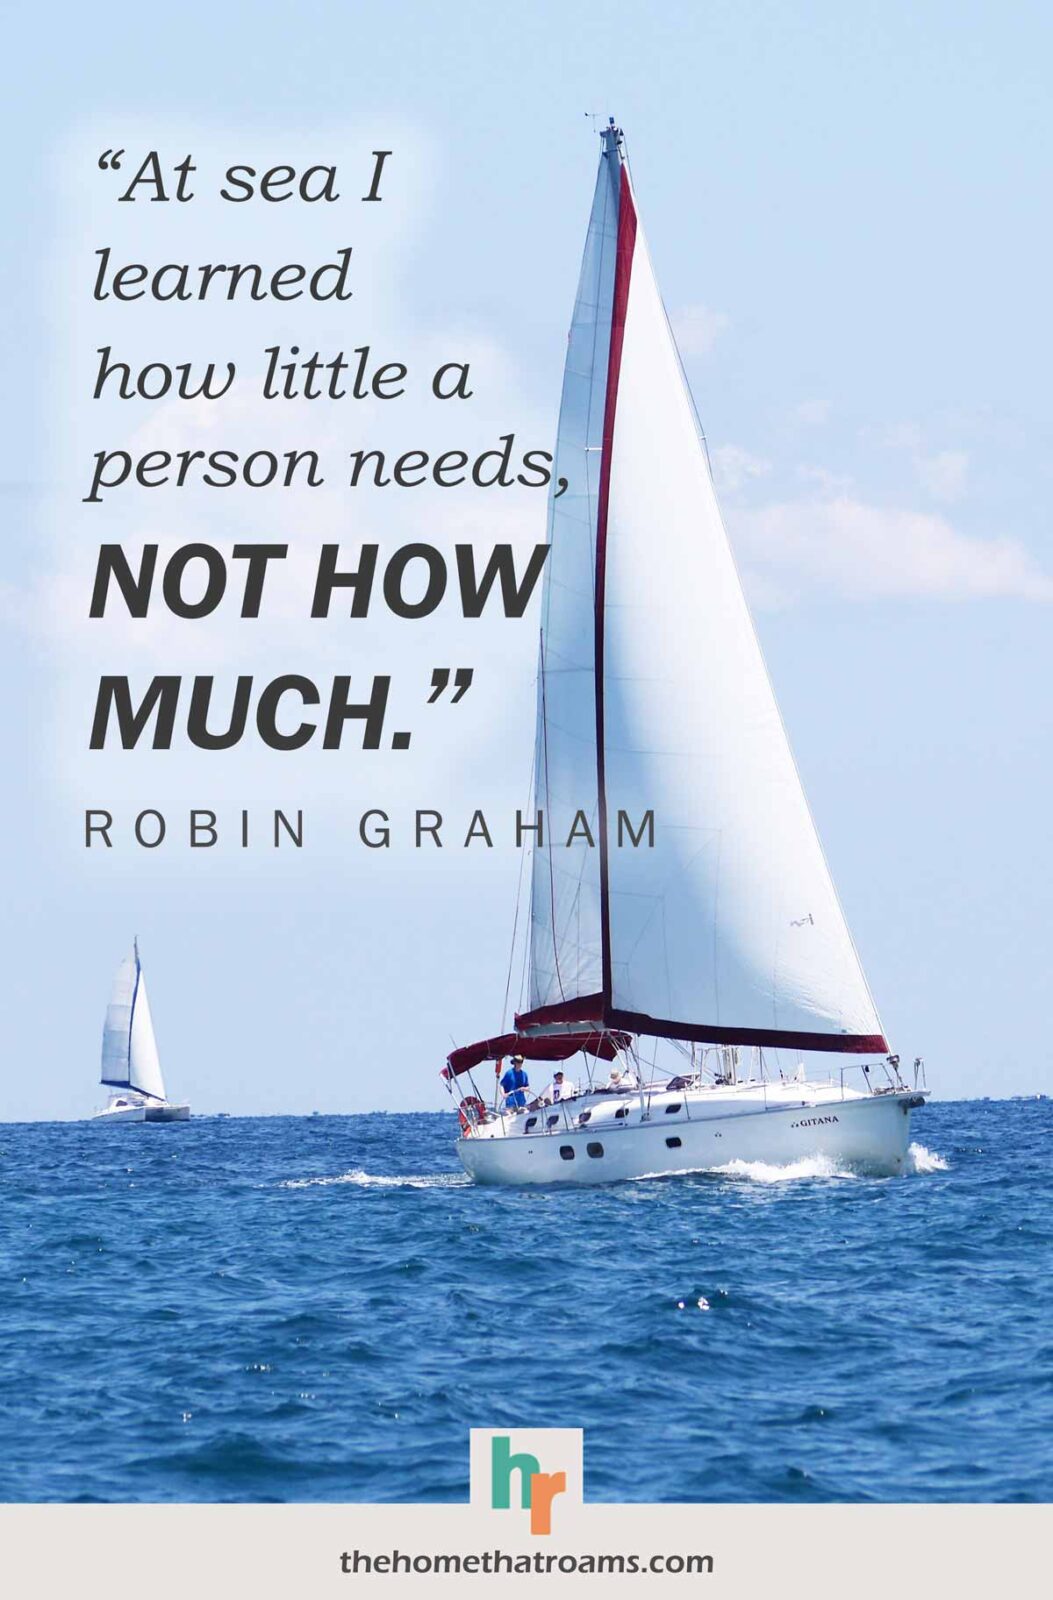 Cruising quote, “At sea I learned how little a person needs, not how much.” - Robin Graham, written above a sailboat sailing on blue water.